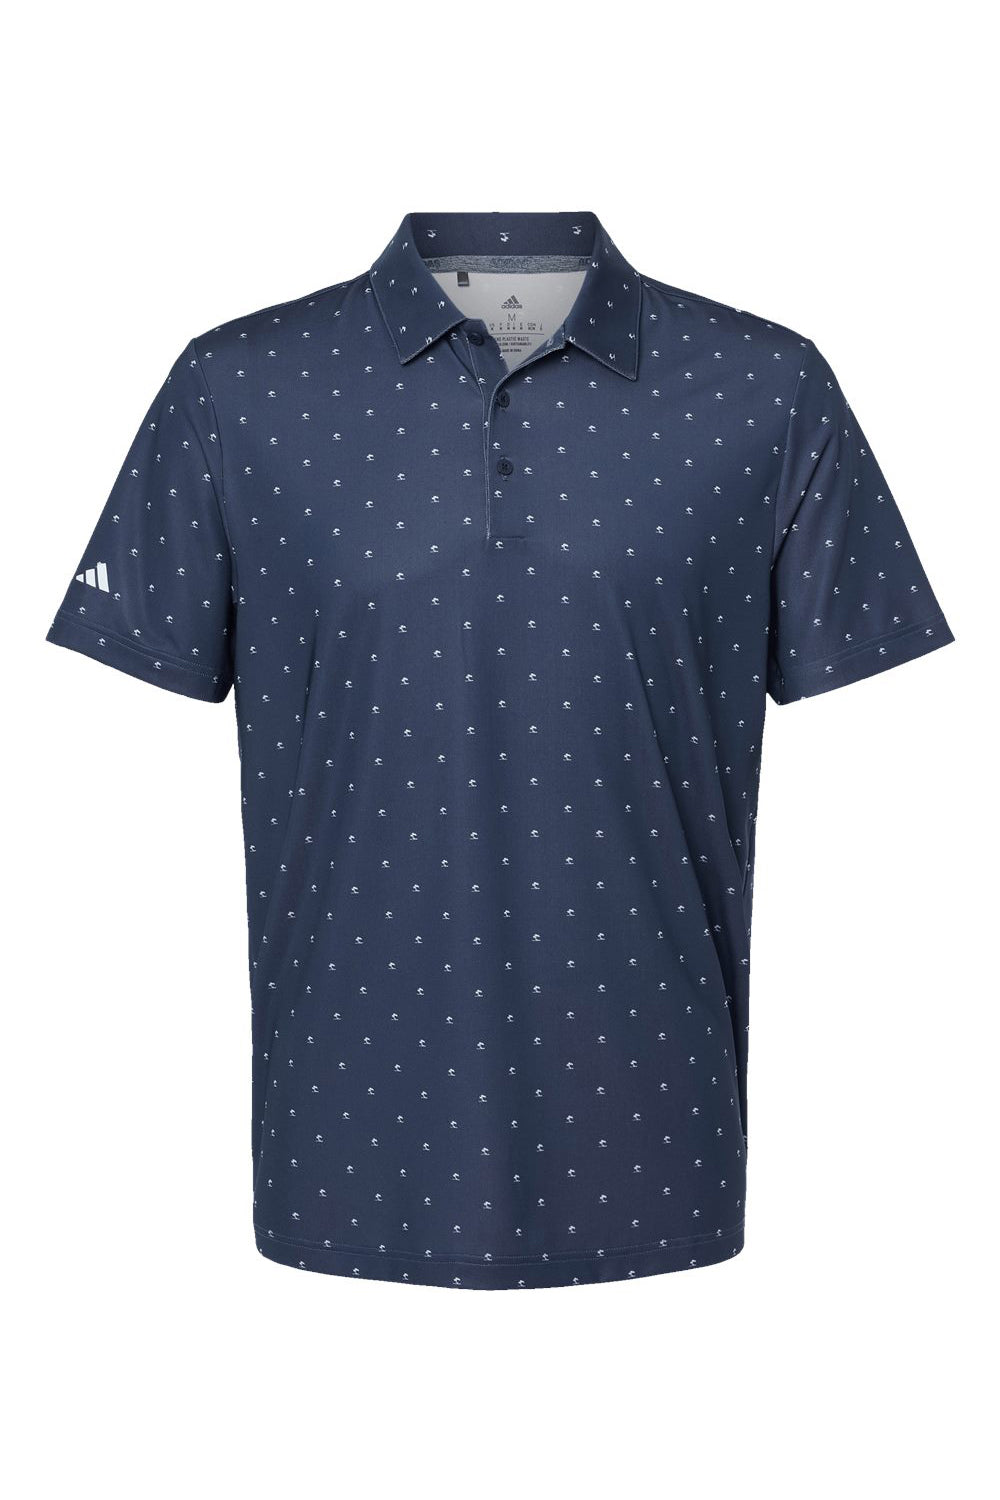 Adidas A574 Mens Pine Tree Short Sleeve Polo Shirt Collegiate Navy Blue/White Flat Front